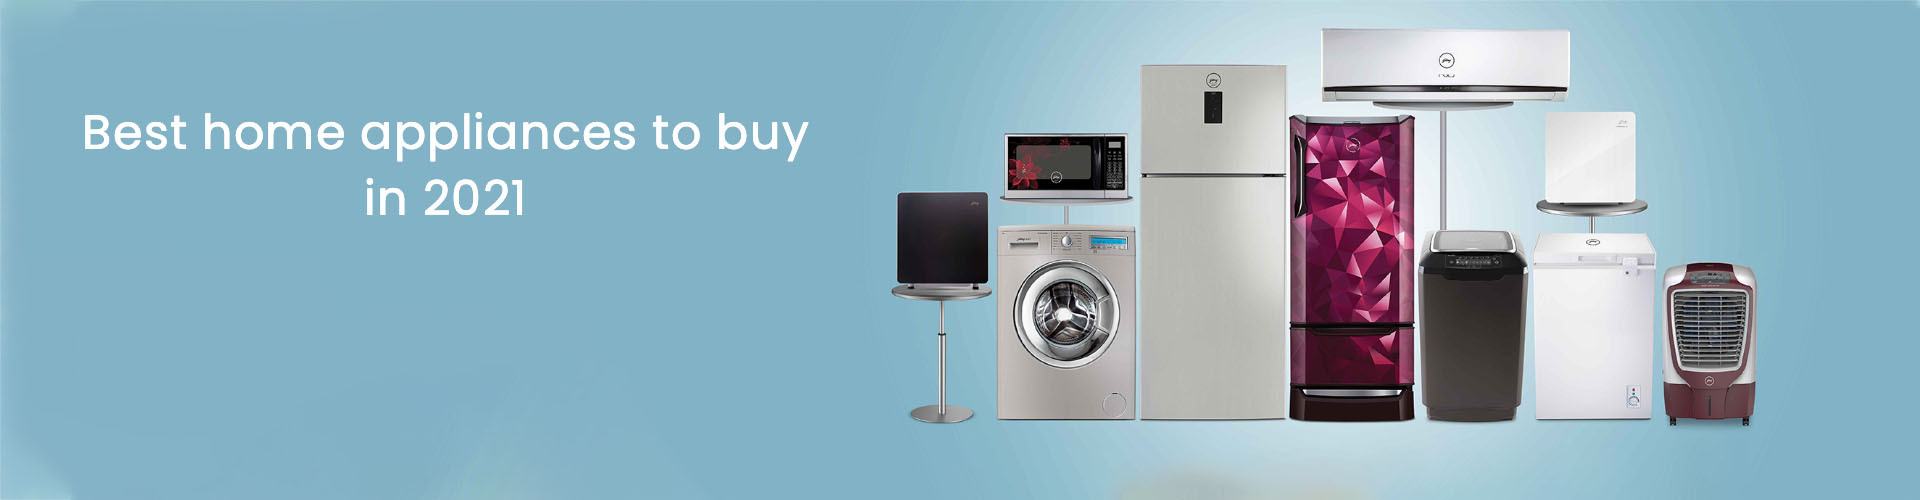 Best Home appliances to buy in 2021